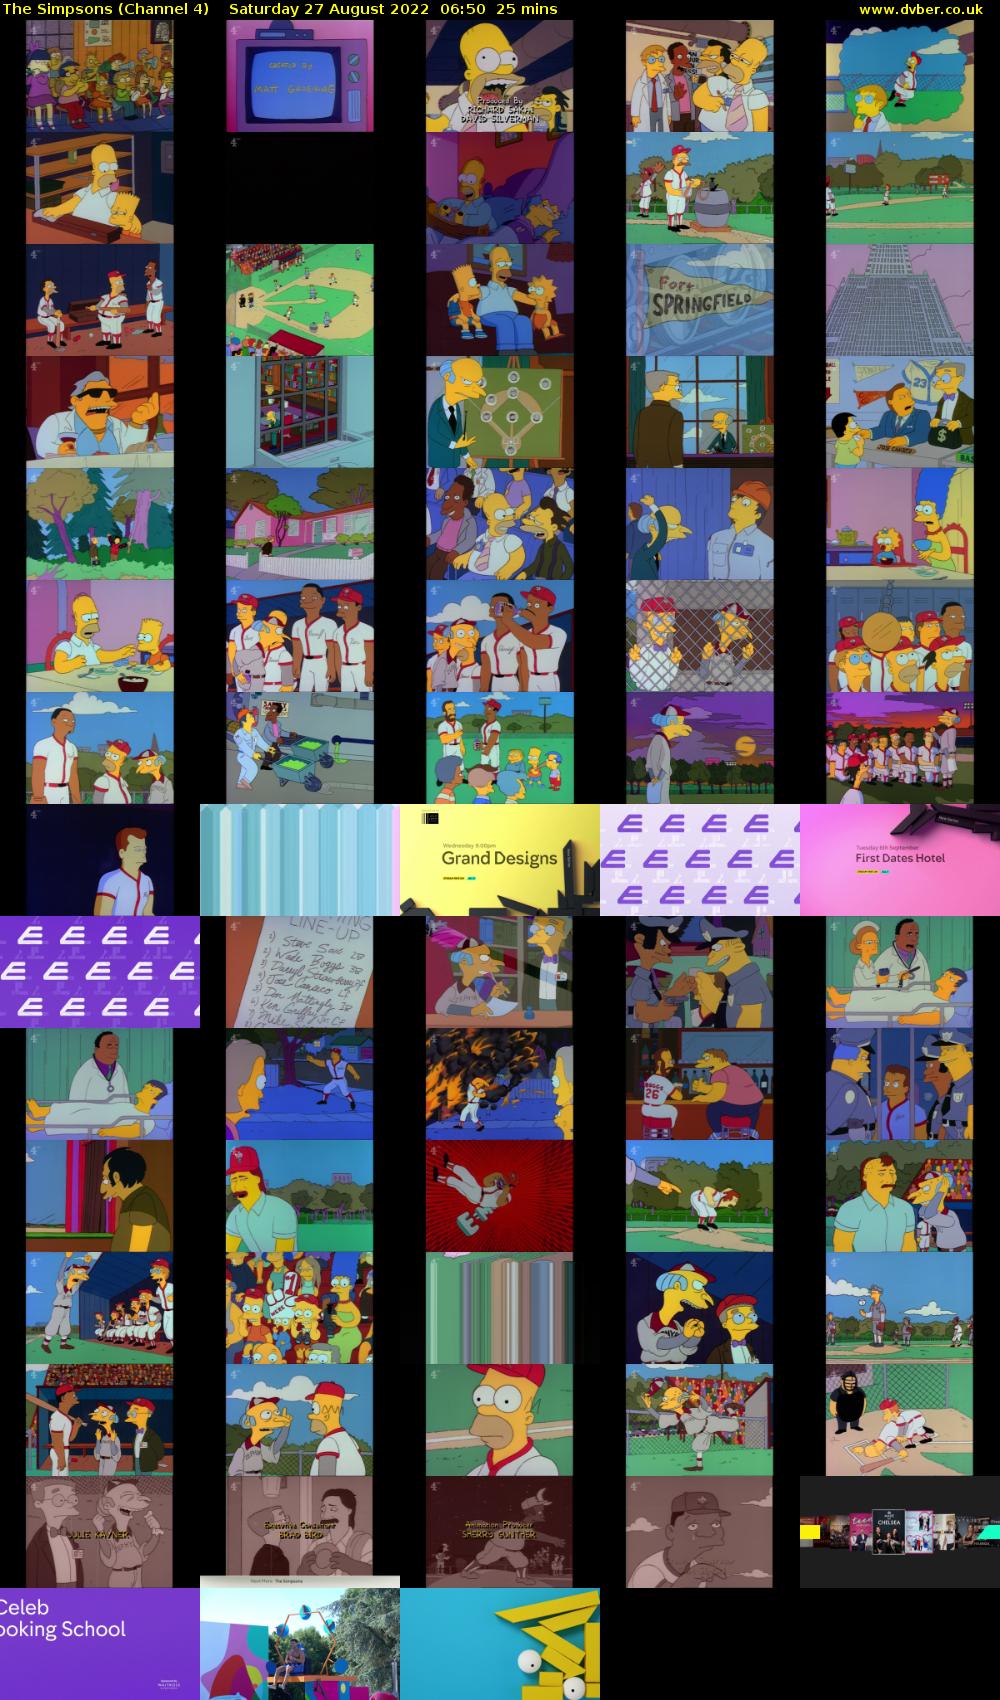 The Simpsons (Channel 4) Saturday 27 August 2022 06:50 - 07:15